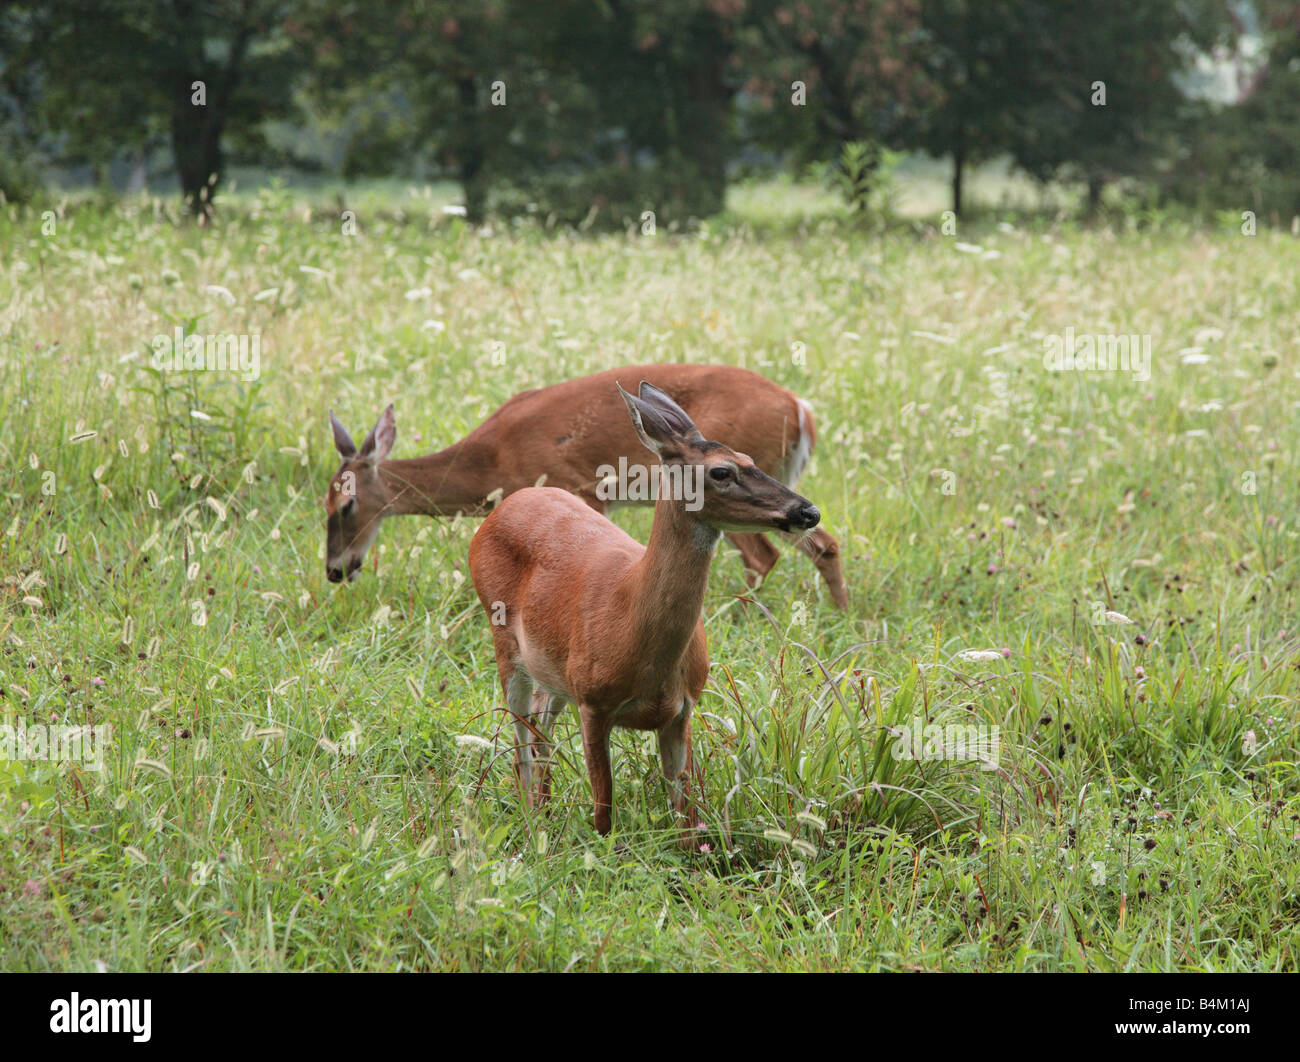 two deers on the field Stock Photo